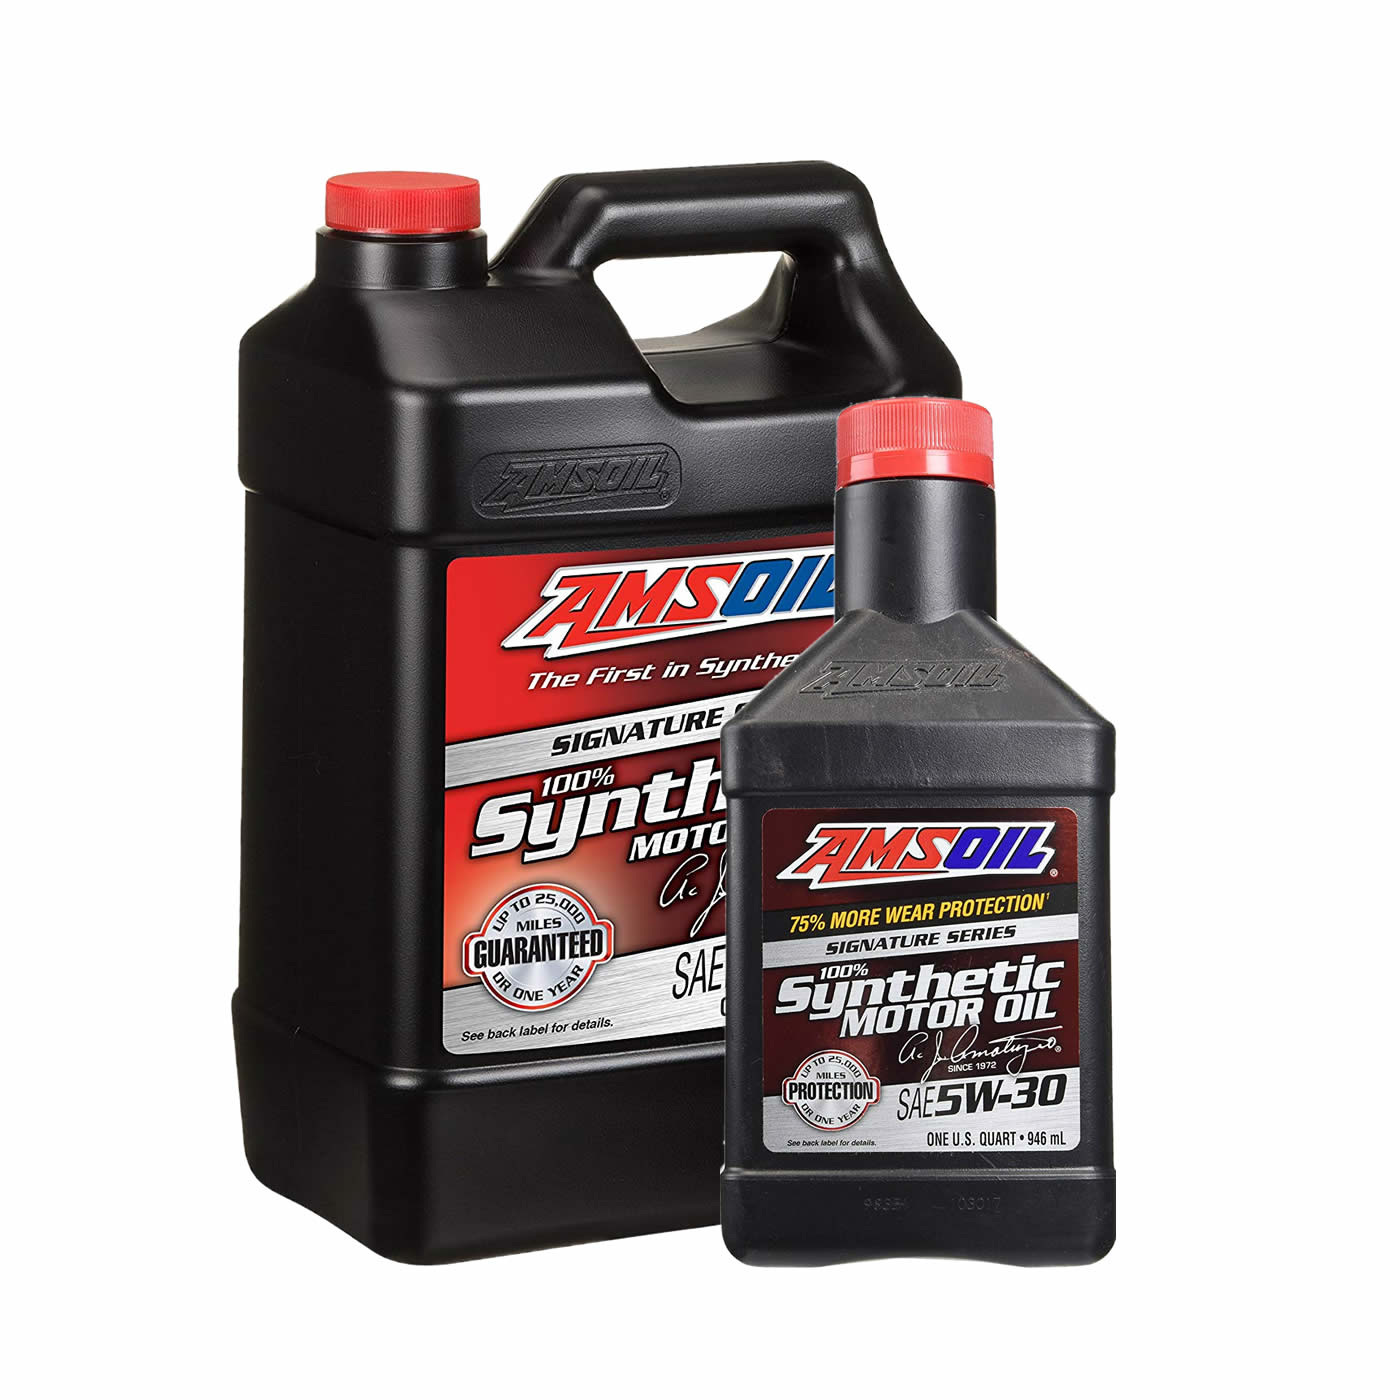 Amsoil signature series synthetic. AMSOIL SS 5w30. AMSOIL Signature 5.40. Масло AMSOIL 5w30. AMSOIL Signature Series 5w-30.